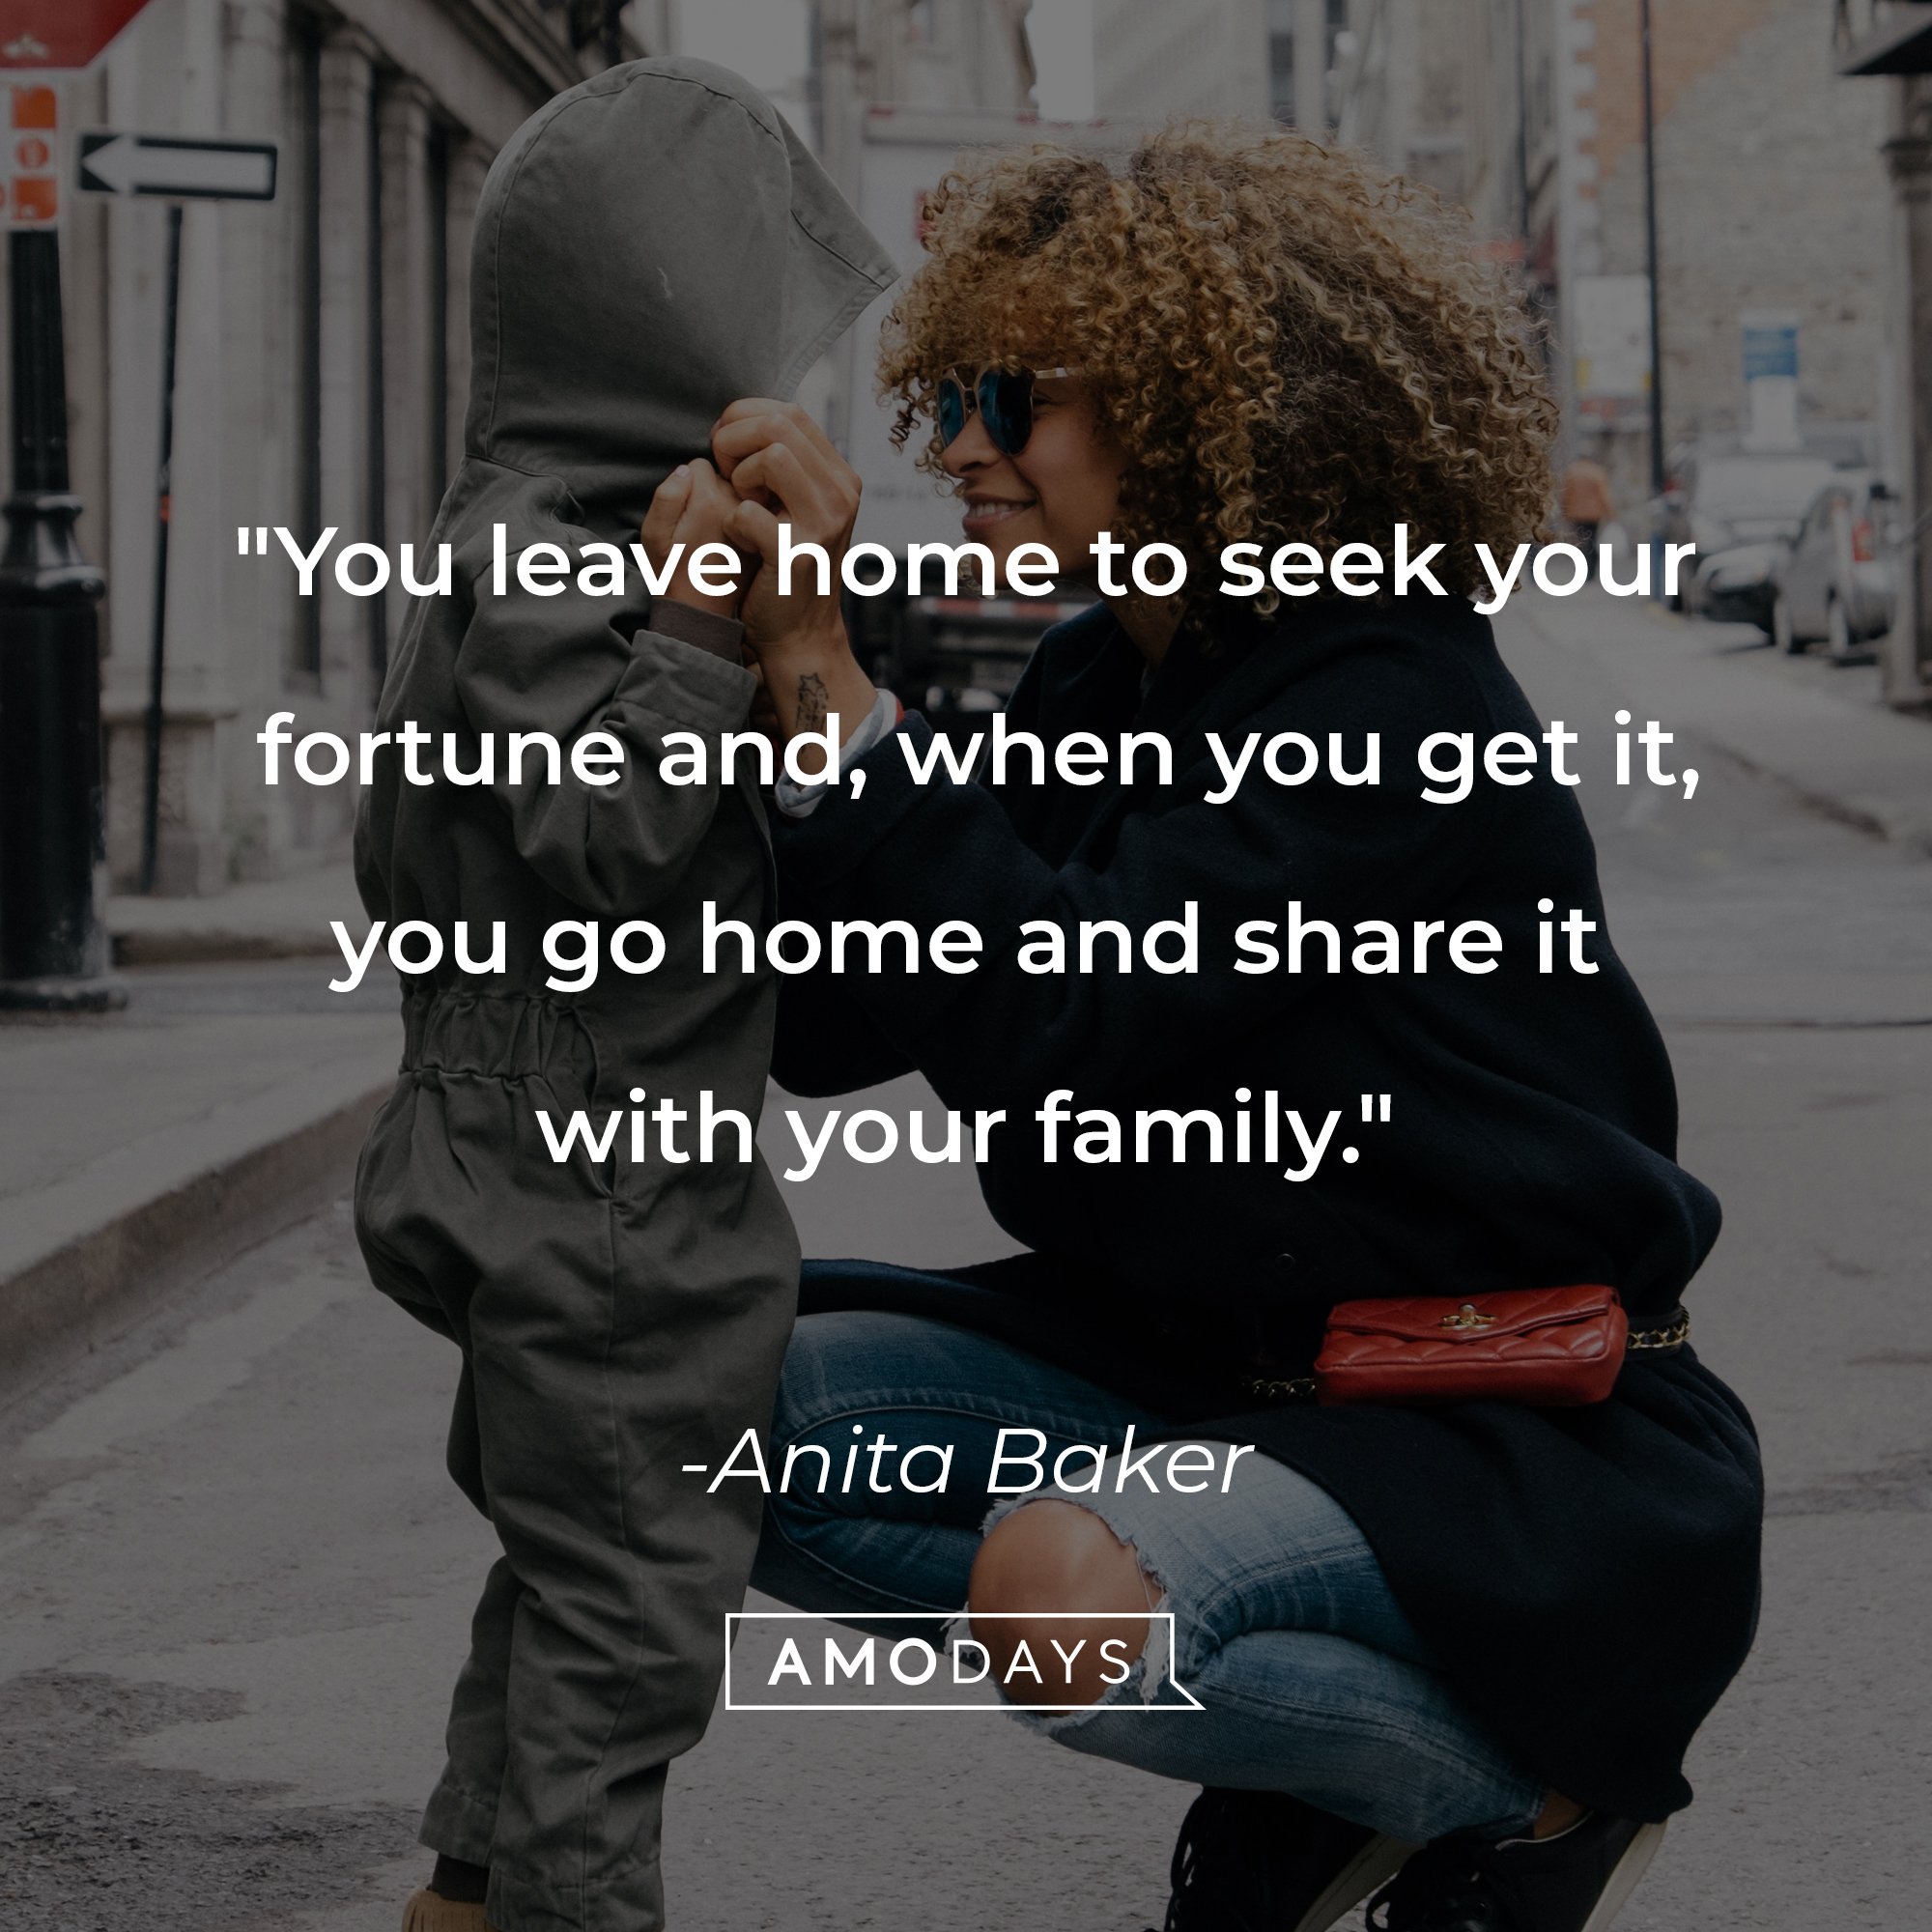 Anita Baker's quote: "You leave home to seek your fortune and, when you get it, you go home and share it with your family." | Image: AmoDays